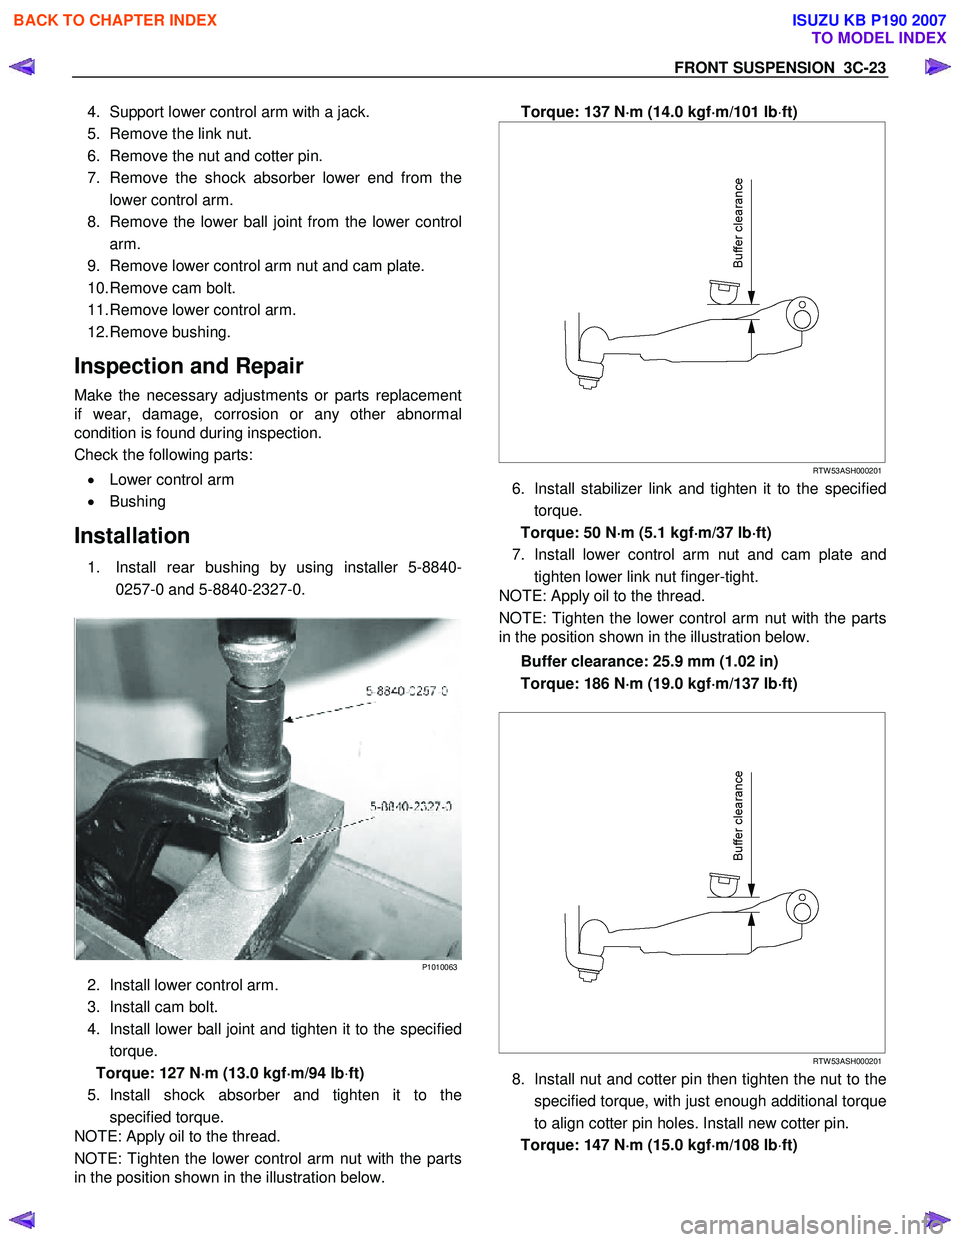 ISUZU KB P190 2007  Workshop Repair Manual FRONT SUSPENSION  3C-23 
4.  Support lower control arm with a jack.   
5.  Remove the link nut. 
6.  Remove the nut and cotter pin.  
7.  Remove the shock absorber lower end from the lower control arm